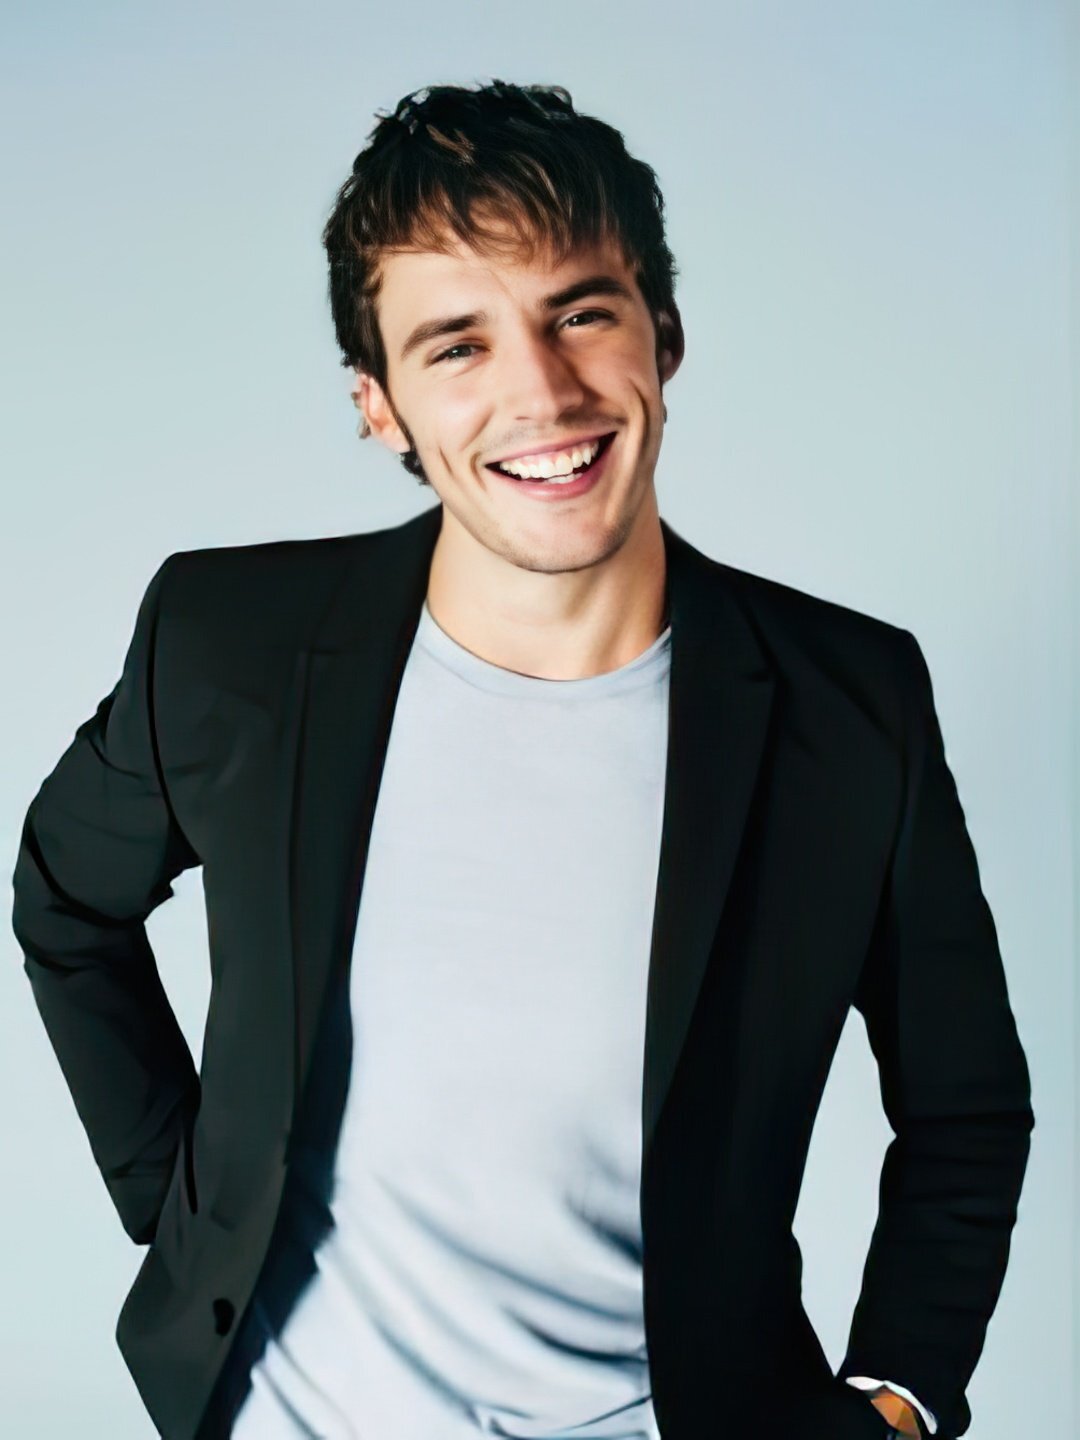 Sam Claflin who are his parents